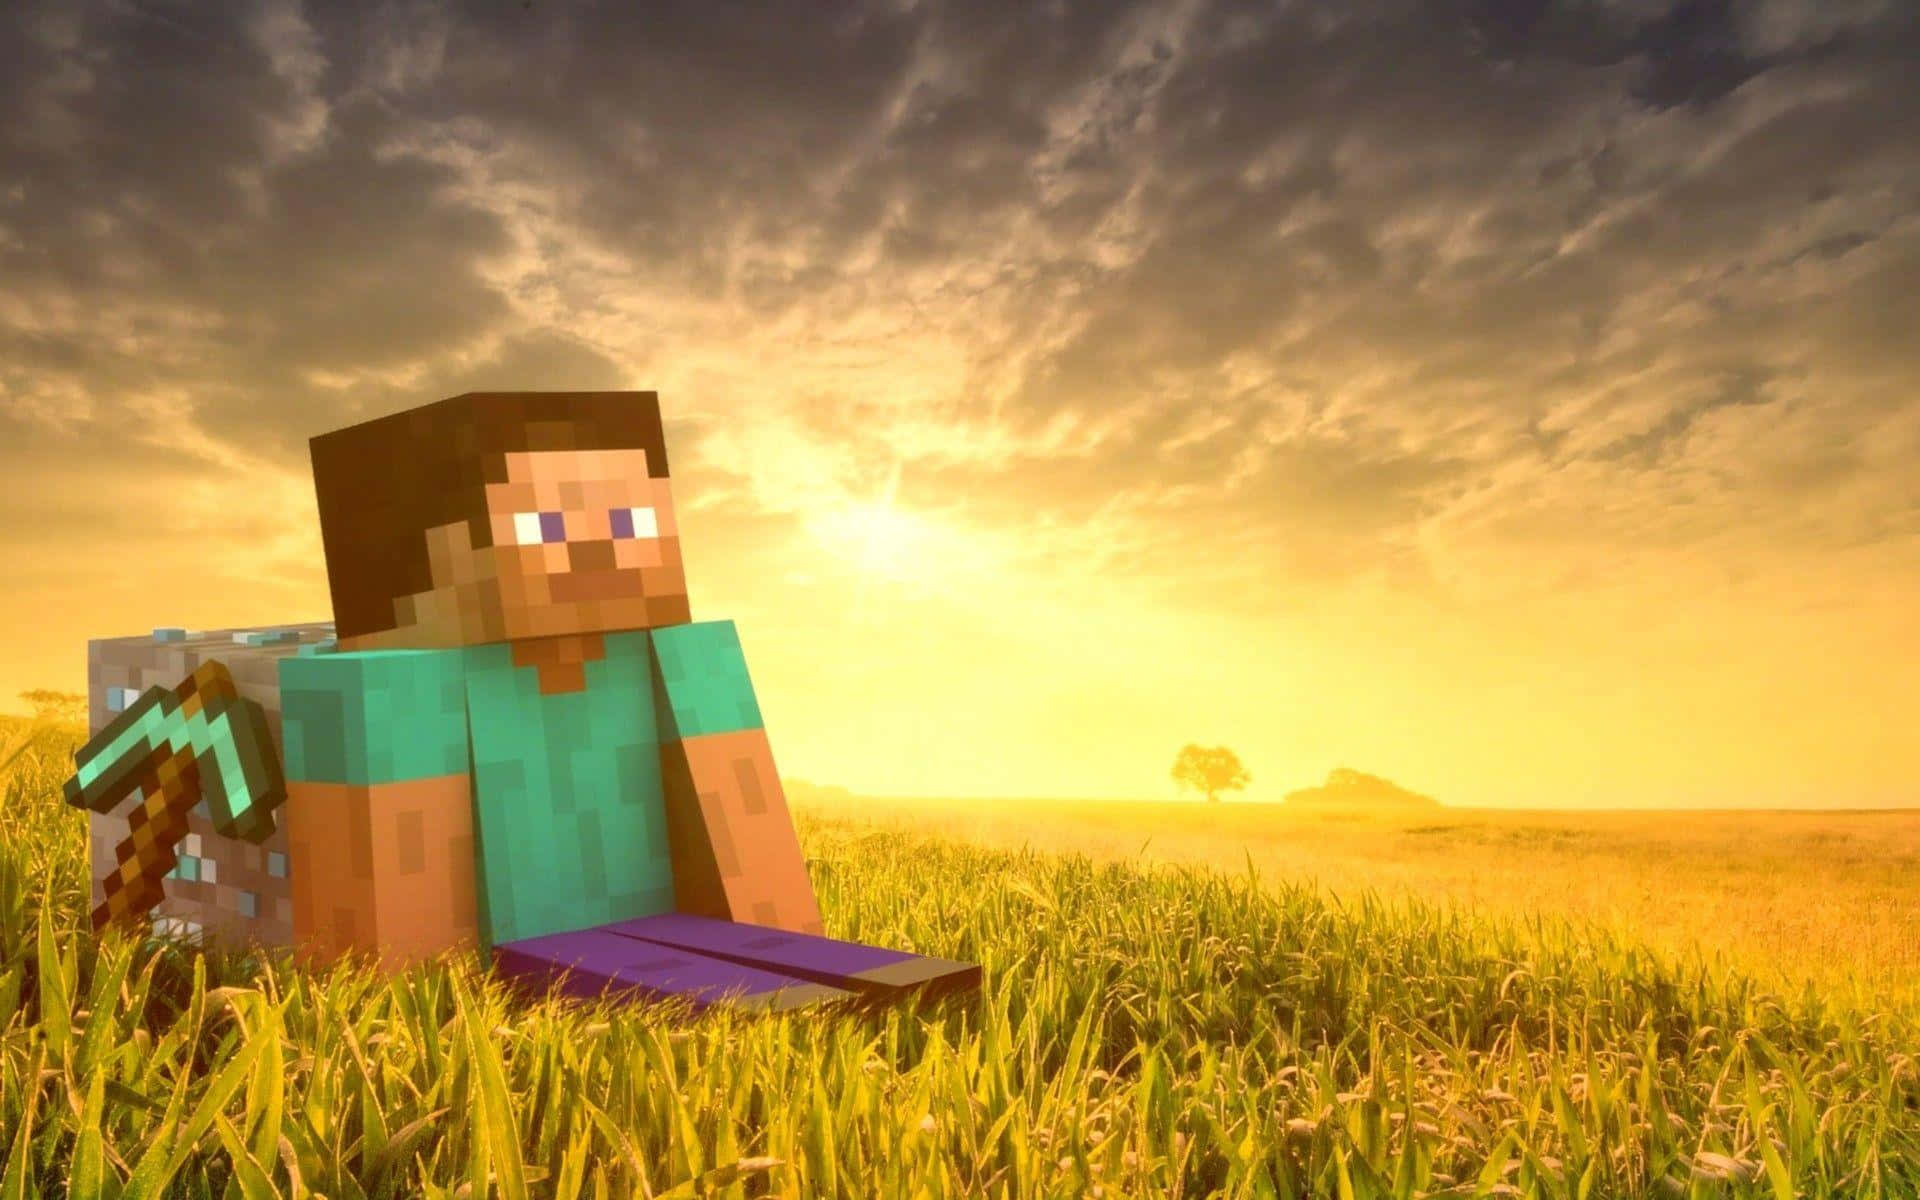 Get Creative With Your Minecraft Worlds